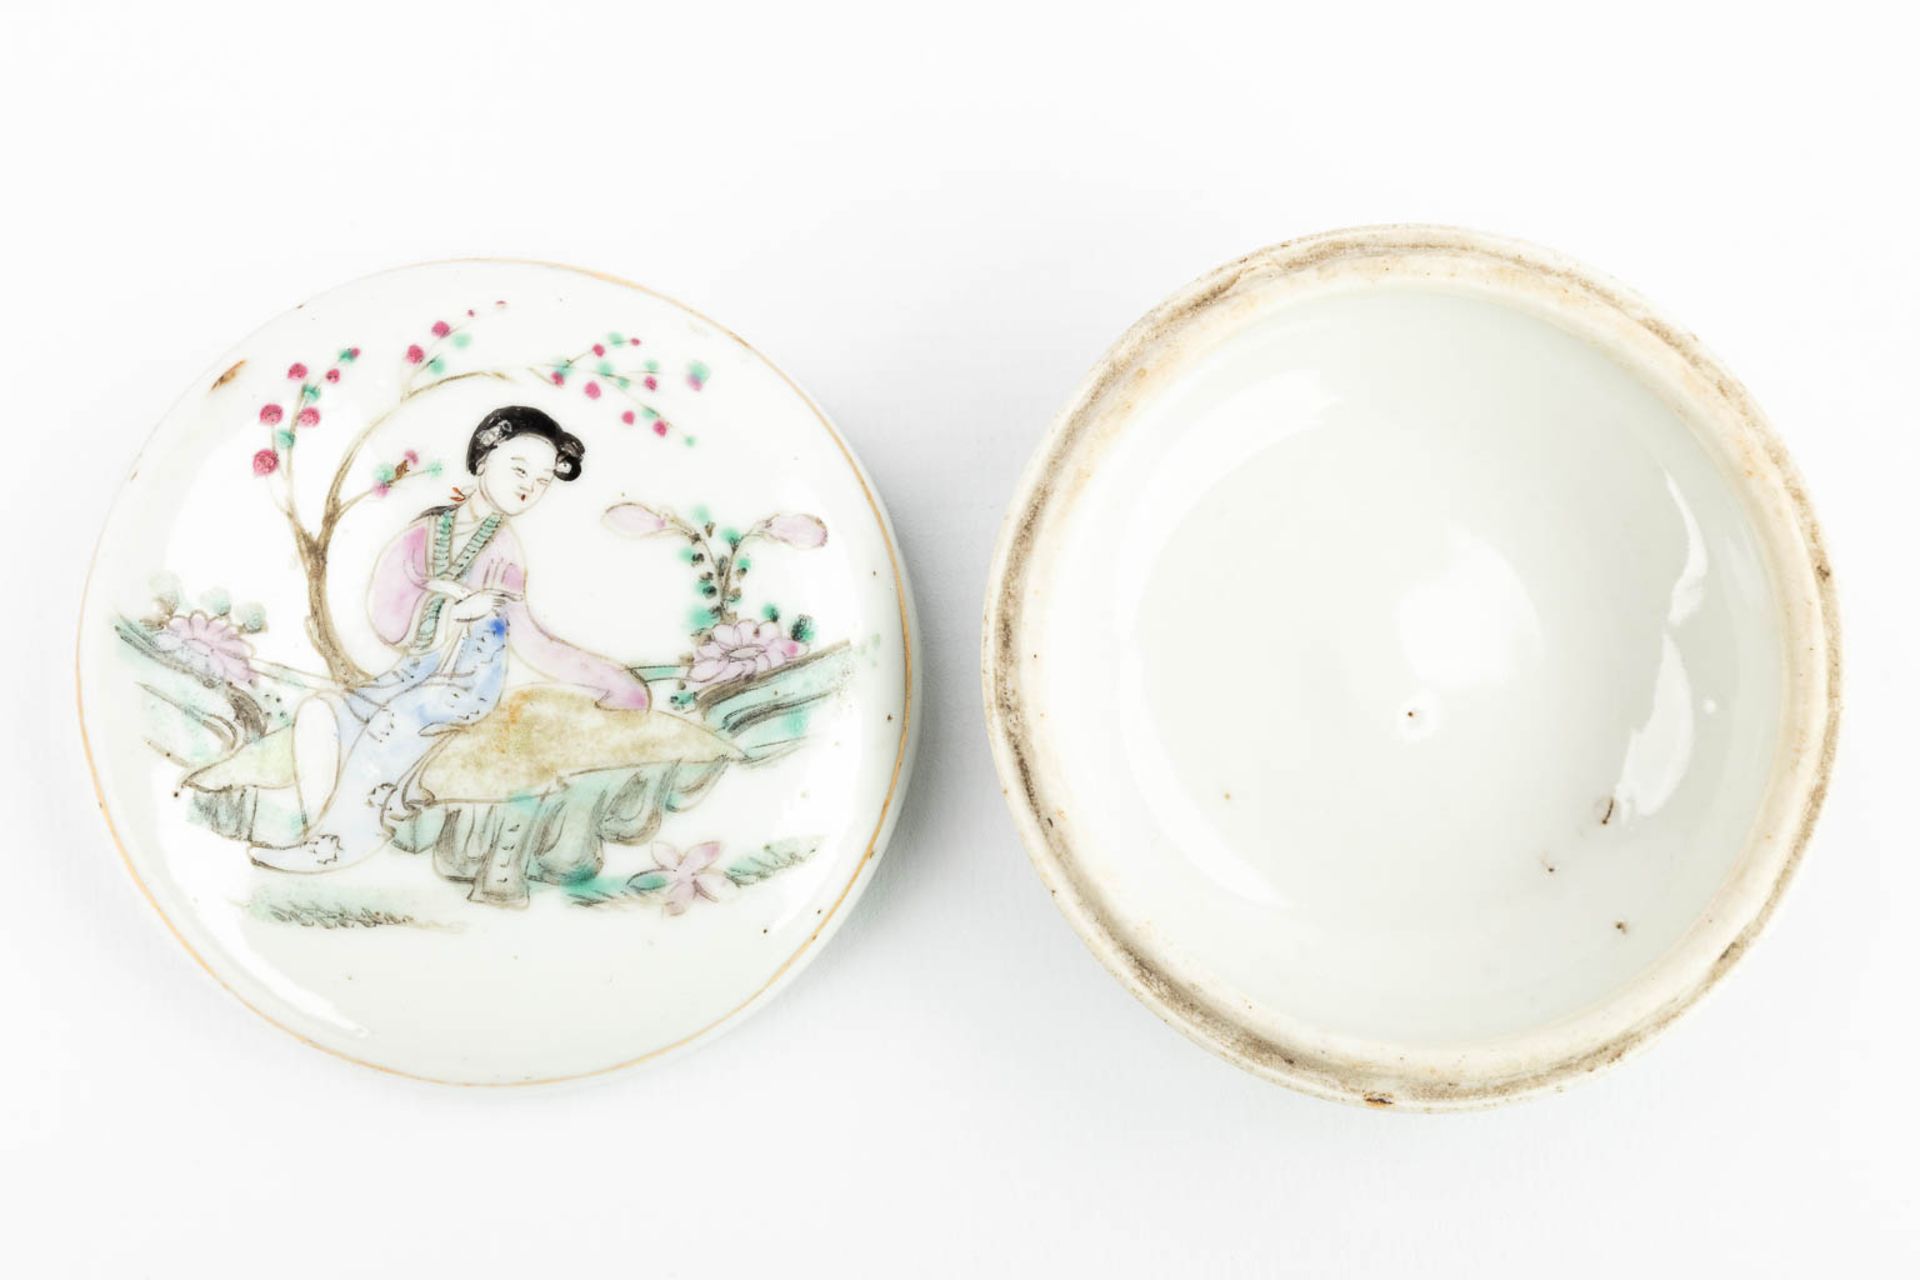 AÊset of 2 Chinese pots with lid, with hand-painted decor and made of porcelain (5 x 8,5 cm) - Image 17 of 18